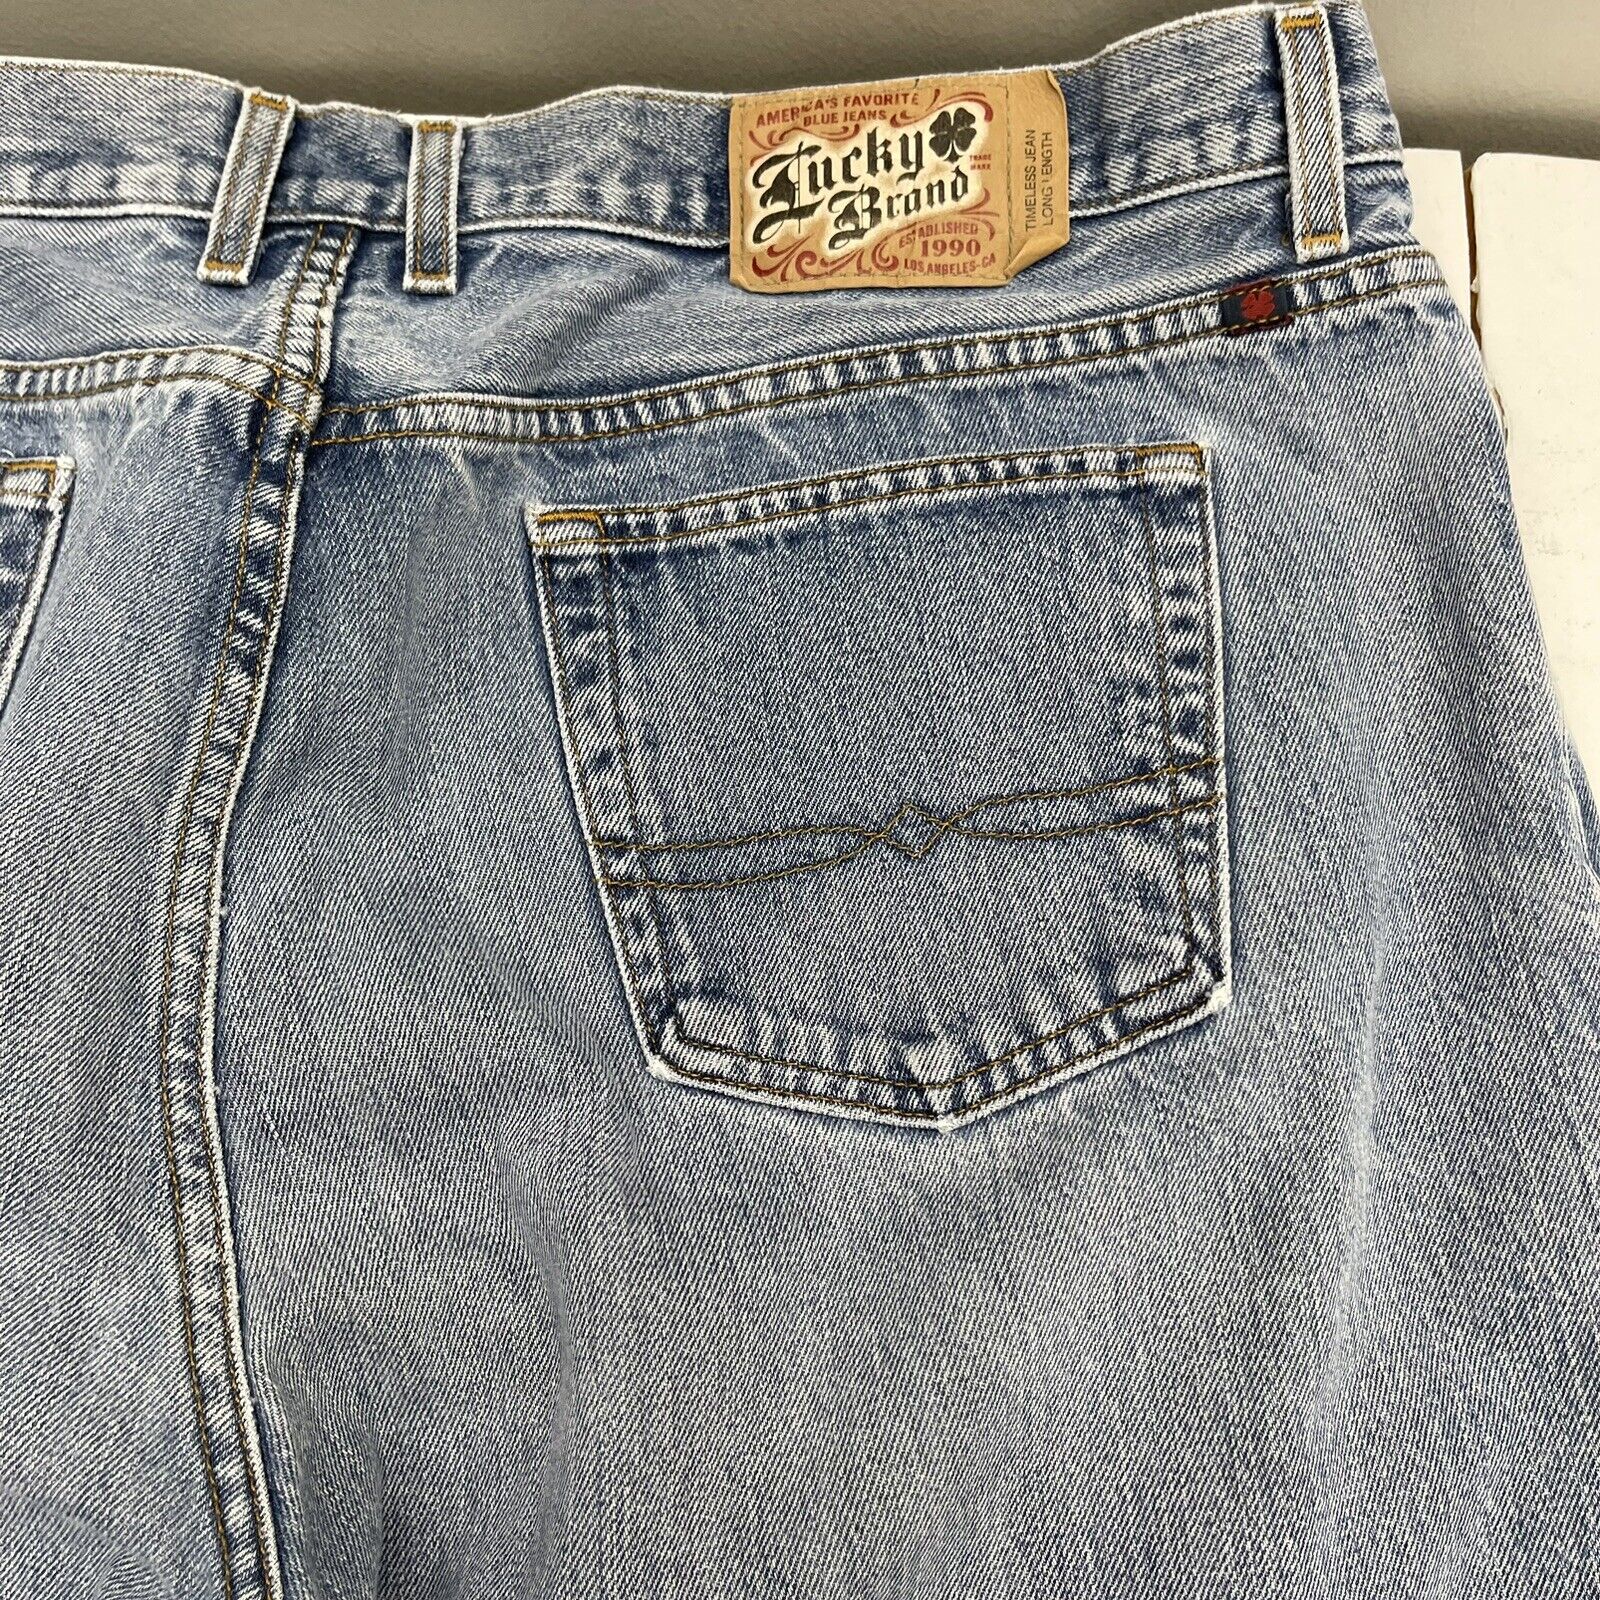 VINTAGE LUCKY BRAND JEANS DUNGAREES, Women's Fashion, Bottoms